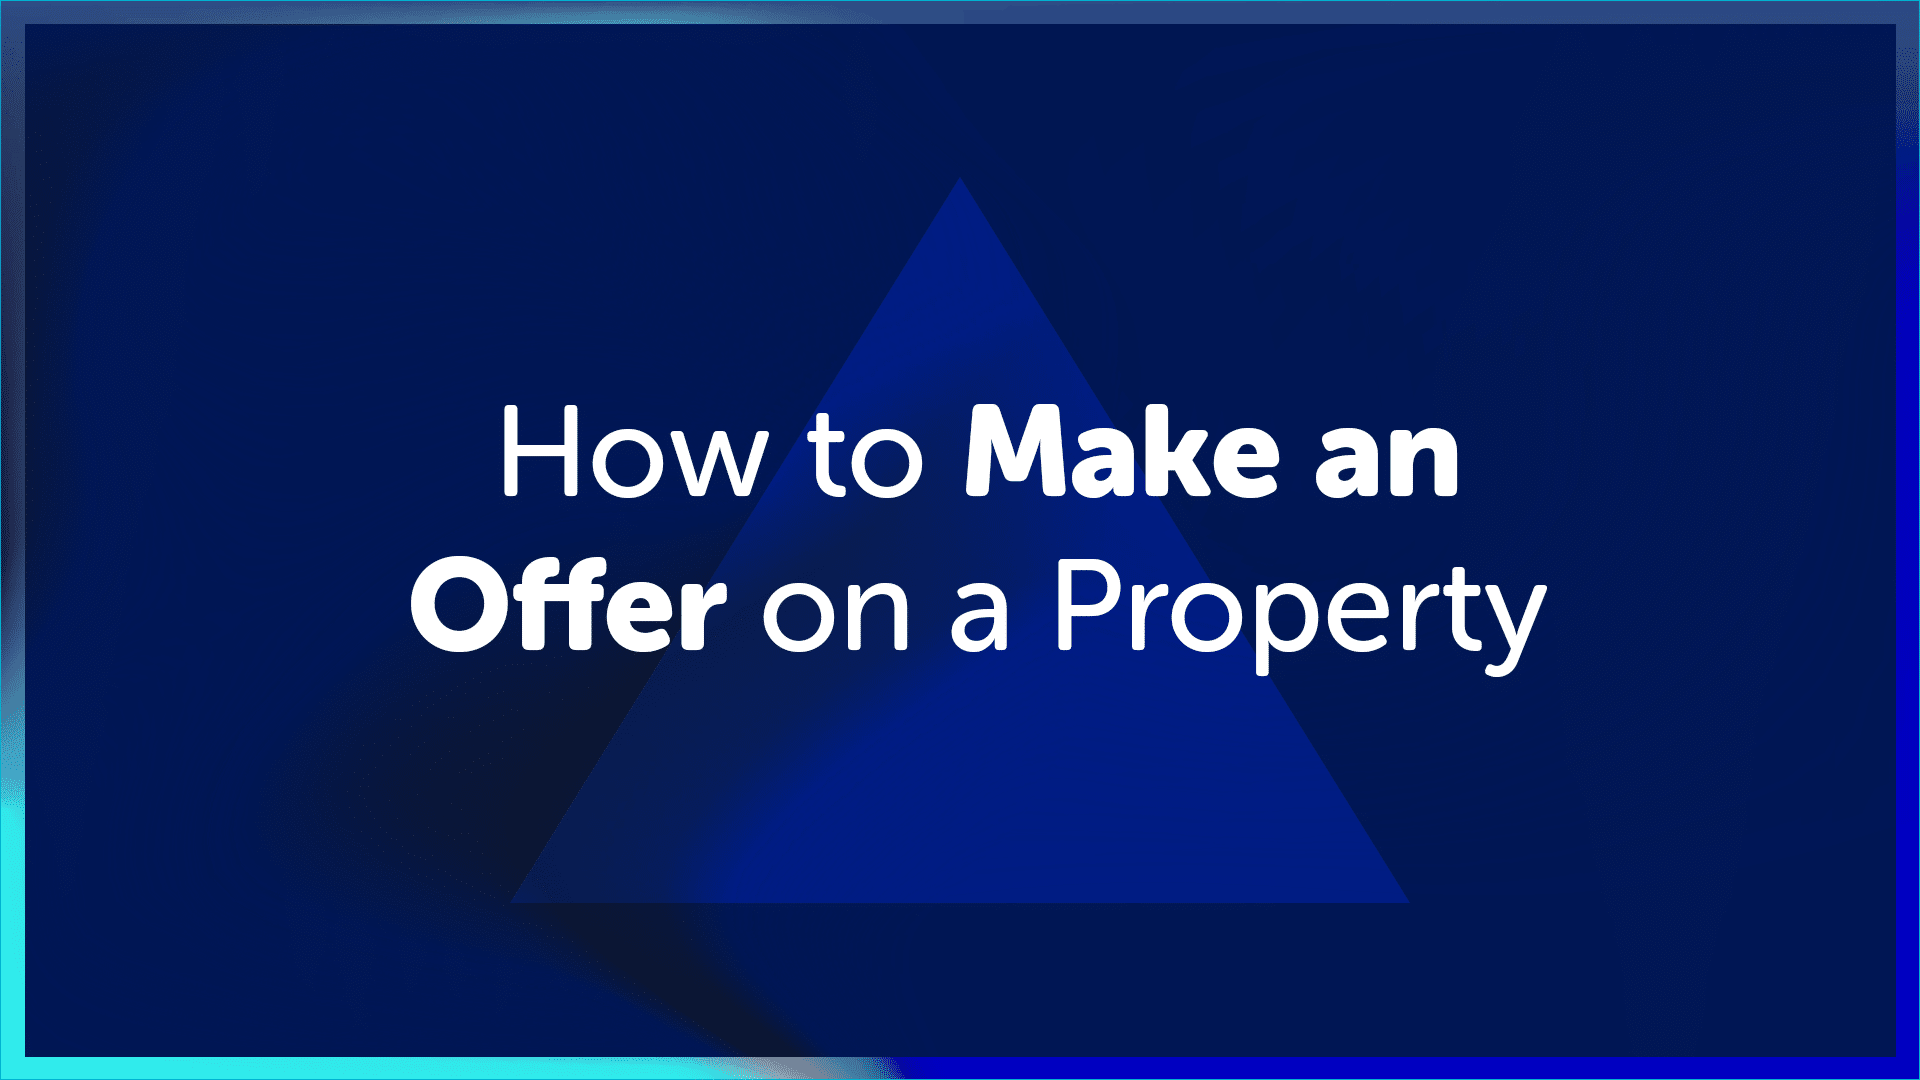 How to Make an Offer on a Property in Manchester